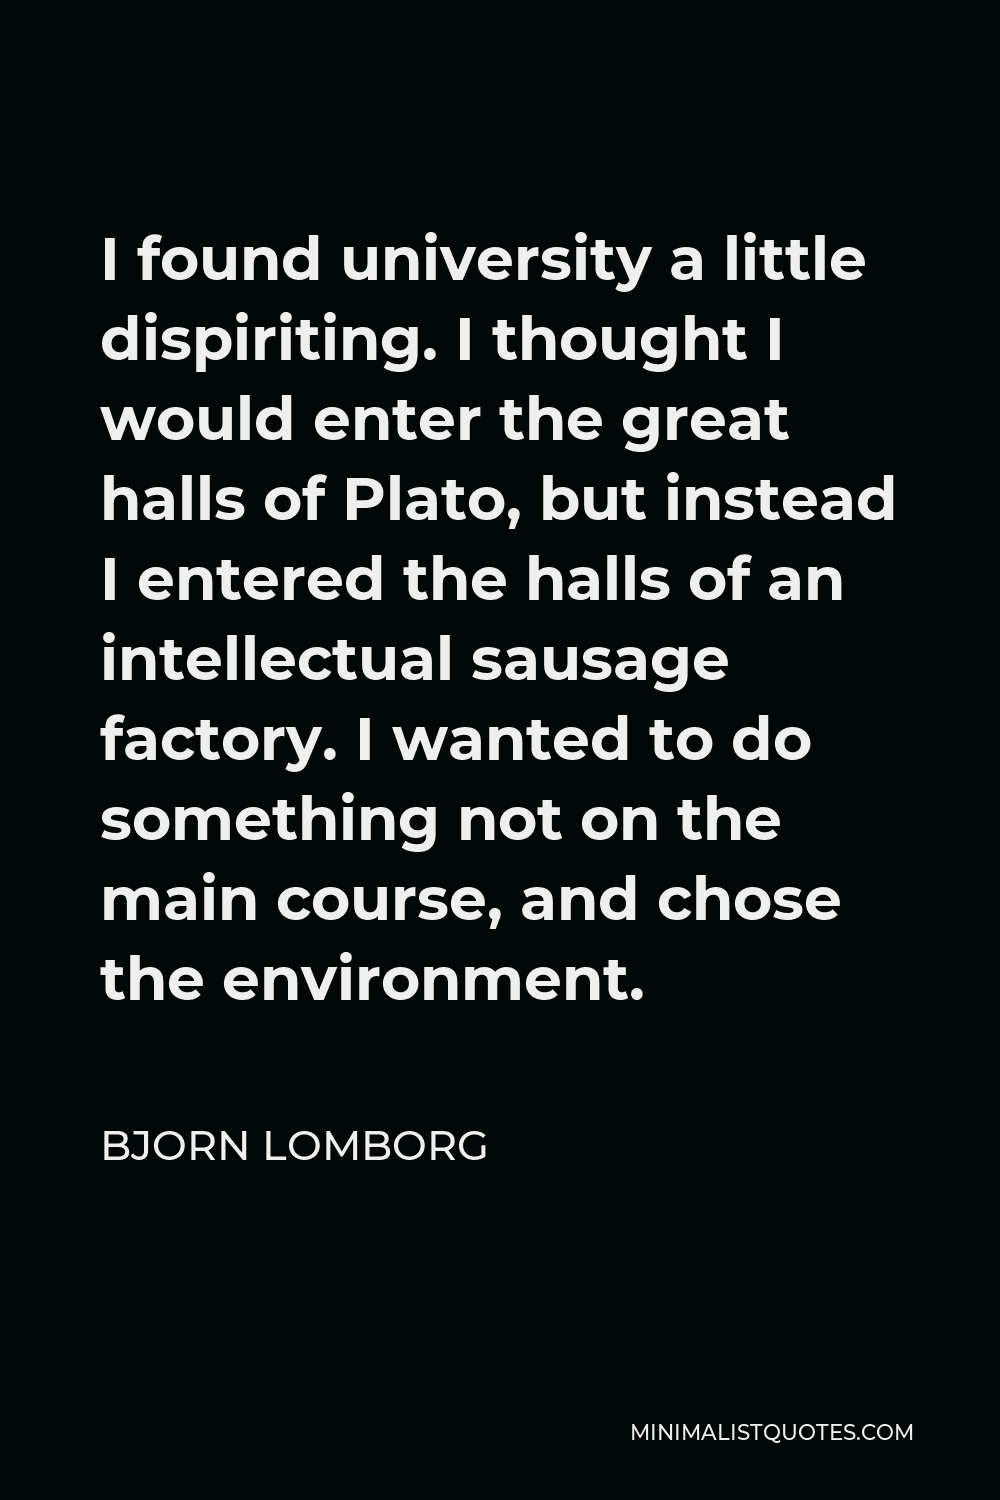 Bjorn Lomborg Quote - I found university a little dispiriting. I thought I would enter the great halls of Plato, but instead I entered the halls of an intellectual sausage factory. I wanted to do something not on the main course, and chose the environment.